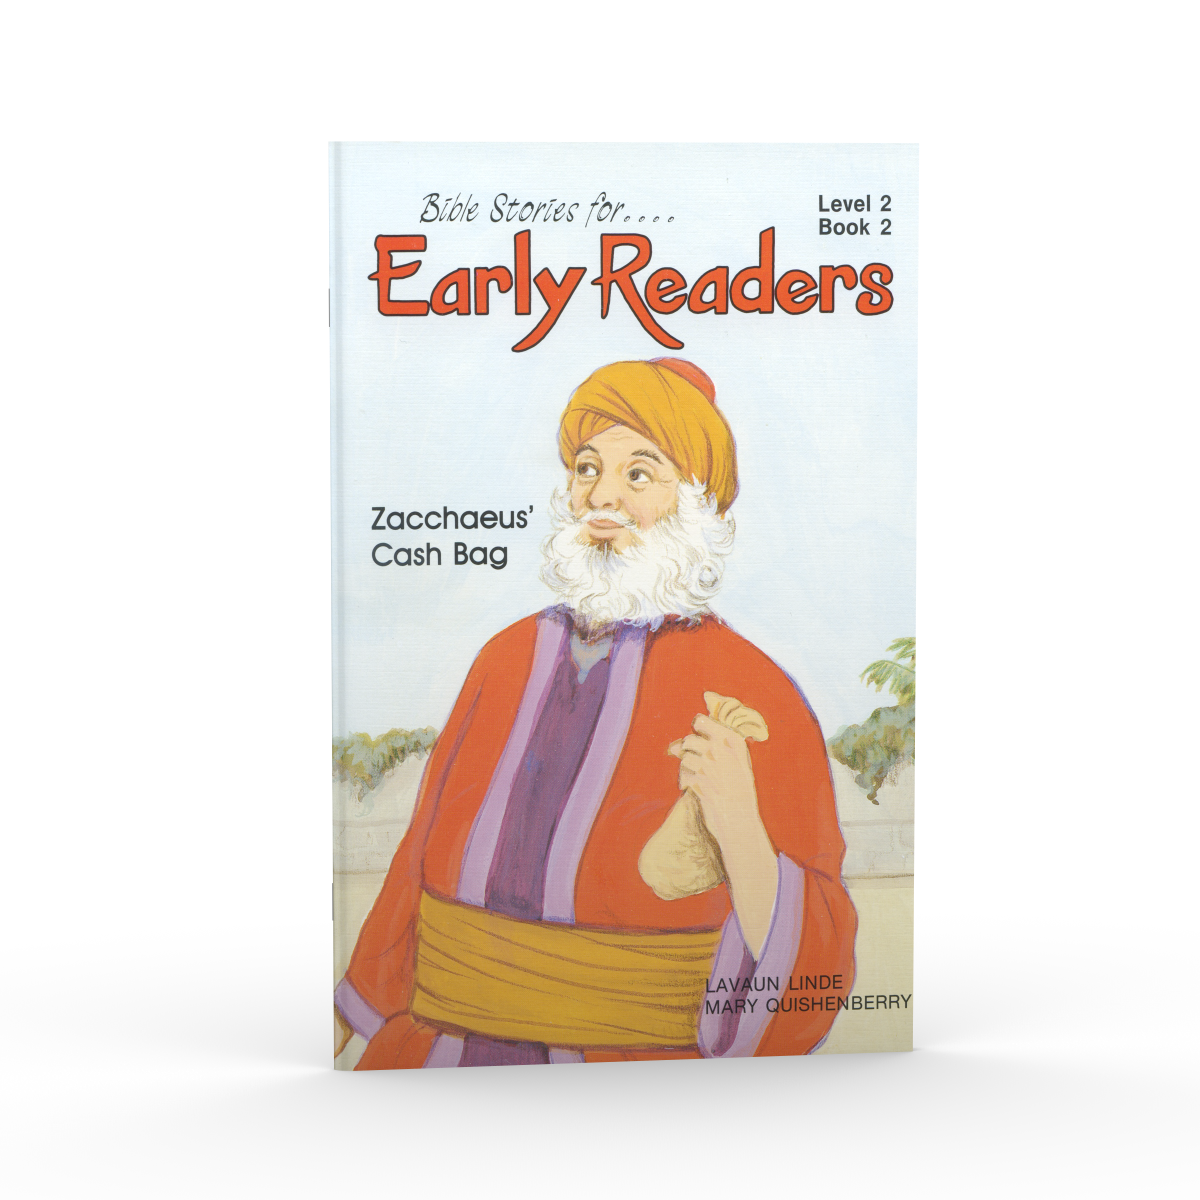 Zacchaeus’ Cash Bag (Bible Stories for Early Readers – Level 2, Book 2)